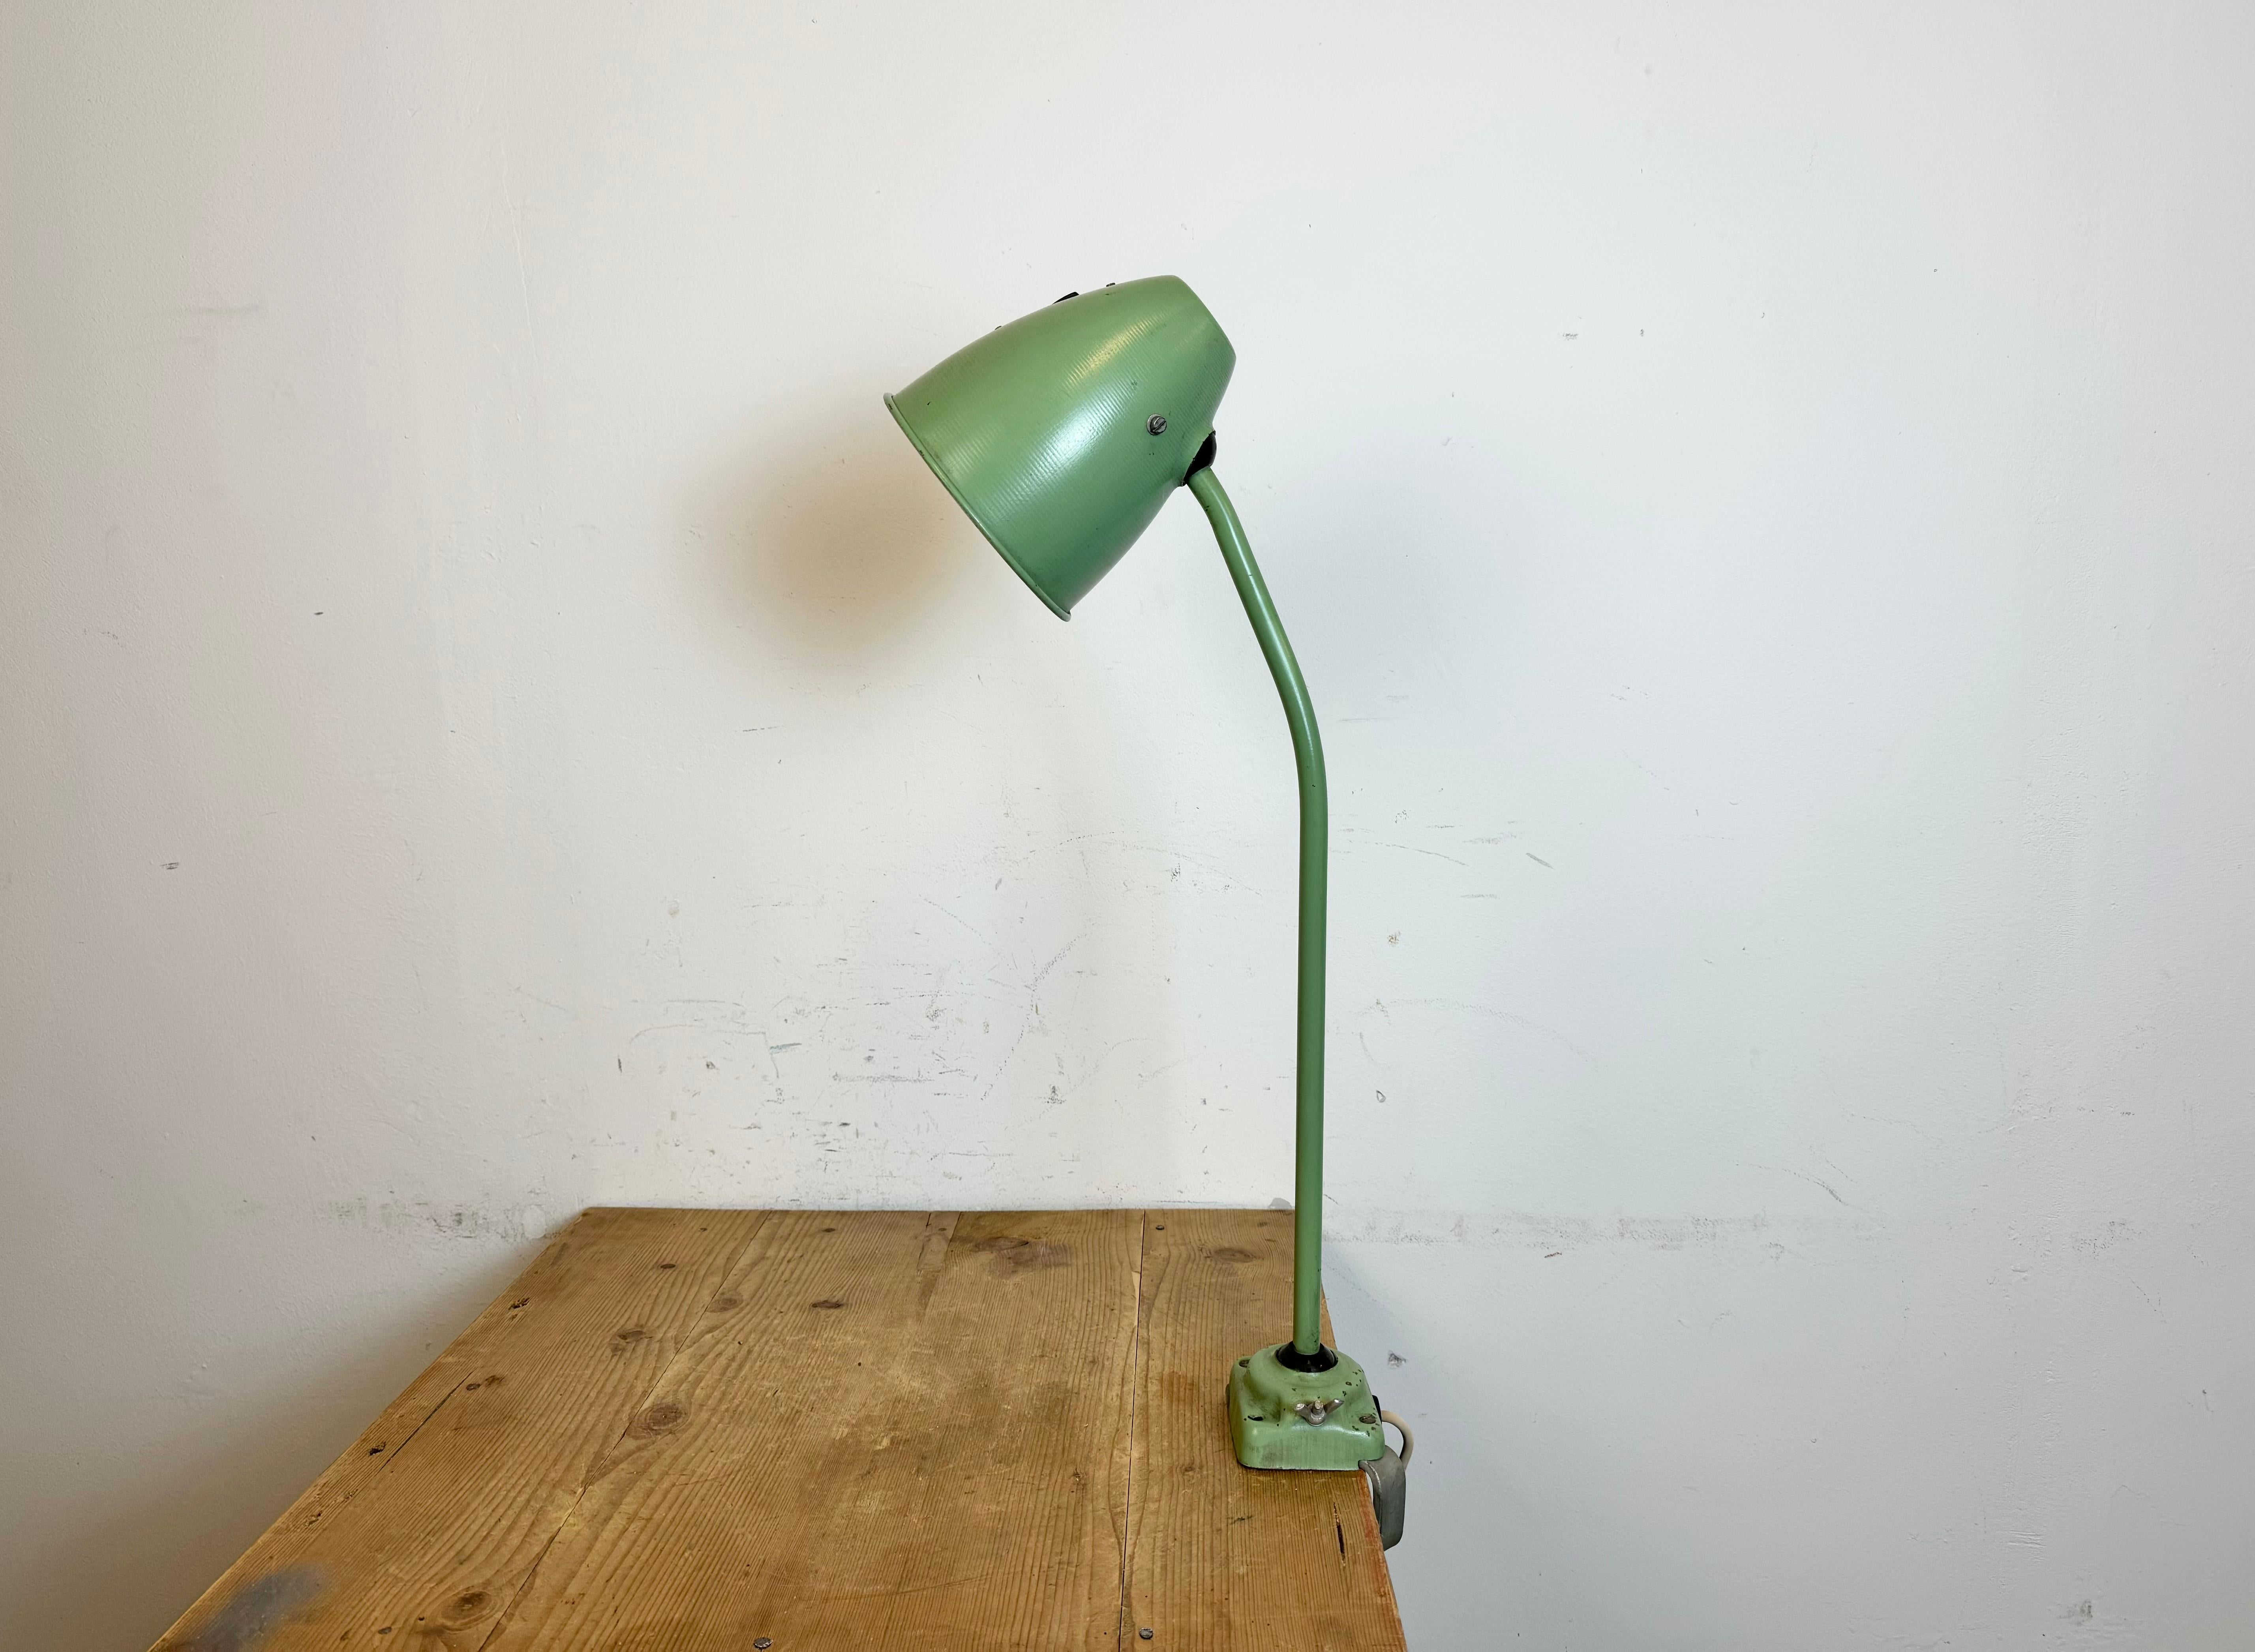 Green industrial adjustable workshop  table lamp was made in former Czechoslovakia during the 1960s. It features an iron shade ,base with clamp and arm with two adjustable joints. The porcelain socket requires standard E 27/ E26 light bulbs.  The